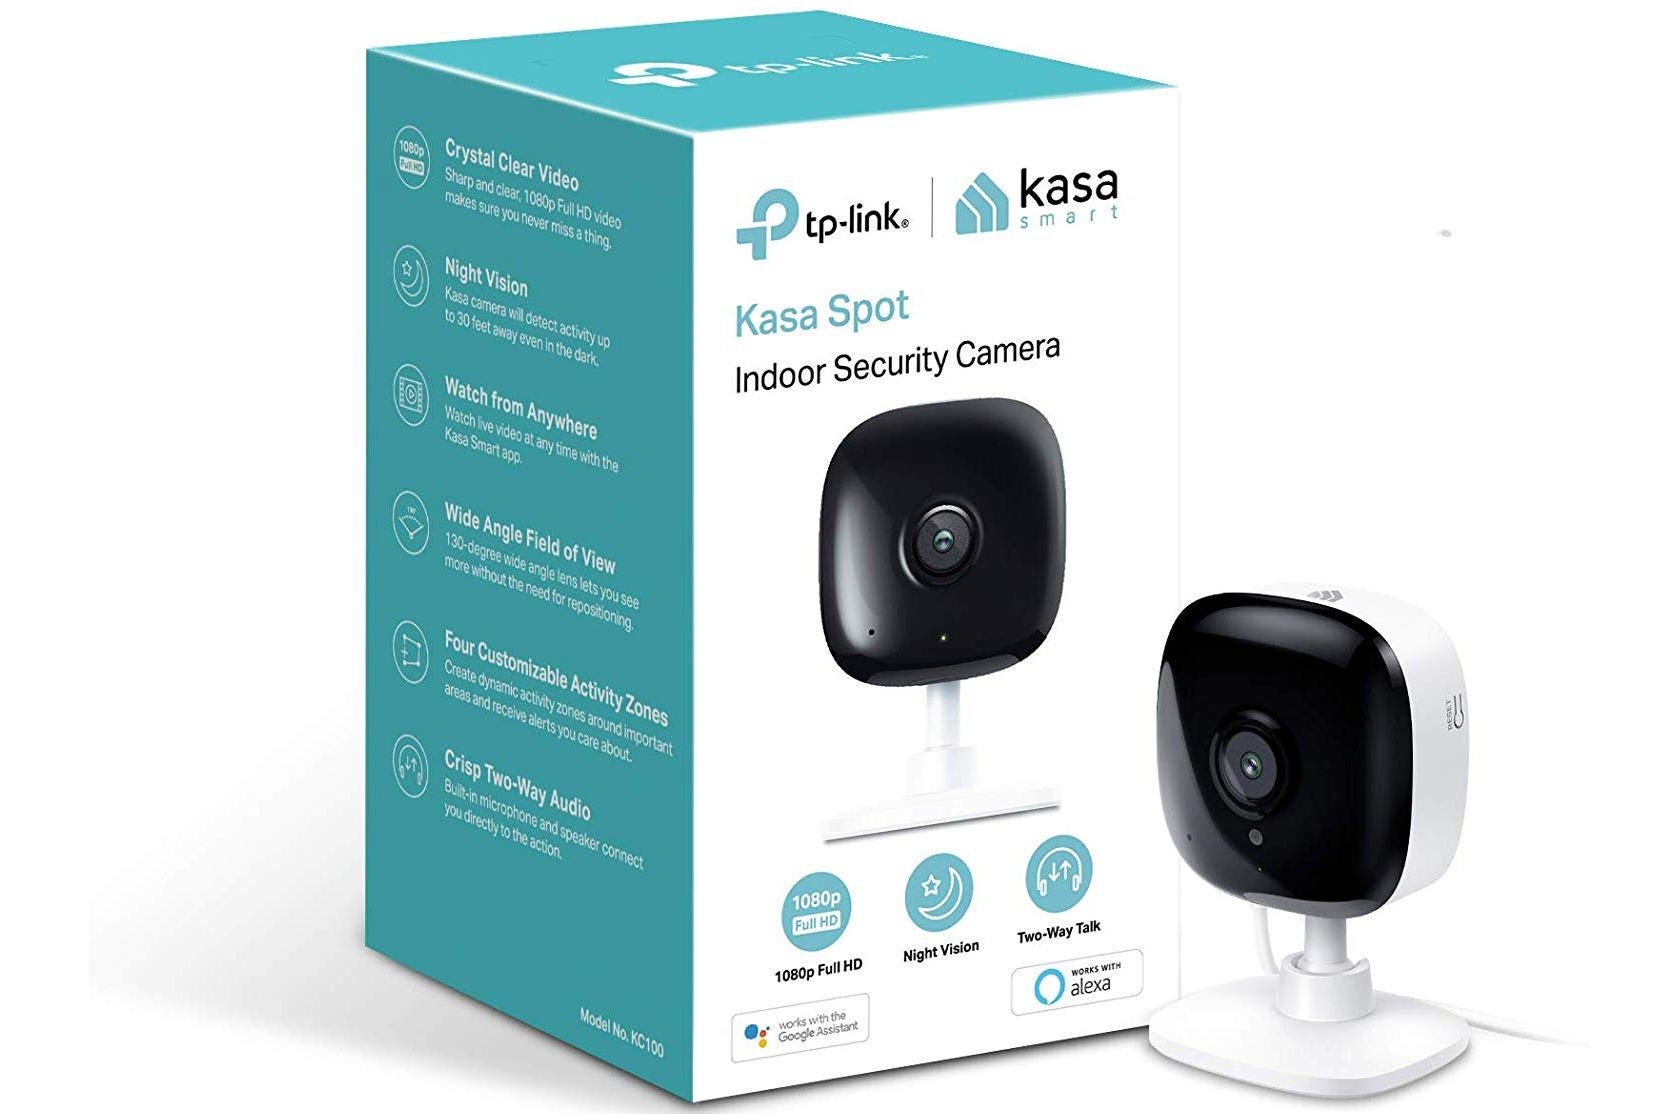 The TP-Link Kasa Spot indoor security camera is another inexpensive option, with a great 1080p image, better two-way audio than on the Wyze Cam, and free cloud storage for up to 12 hours of recordings. It records clips in 30-second increments, more than twice what you get from the Wyze Cam, without suffering from gaps in between (a common issue with security cameras), so you shouldn’t miss any action. Although it has a power cord, the lightweight, bendable design is excellent for hanging anywhere: against a window, in a corner, or suspended under kitchen cabinets. Note, however, that in our tests we found a handful of recordings missing or inaccessible despite their having an entry in the app. Still, for a noncritical use like spying on pets, the price and versatility make the TP-Link Kasa Spot hard to beat.